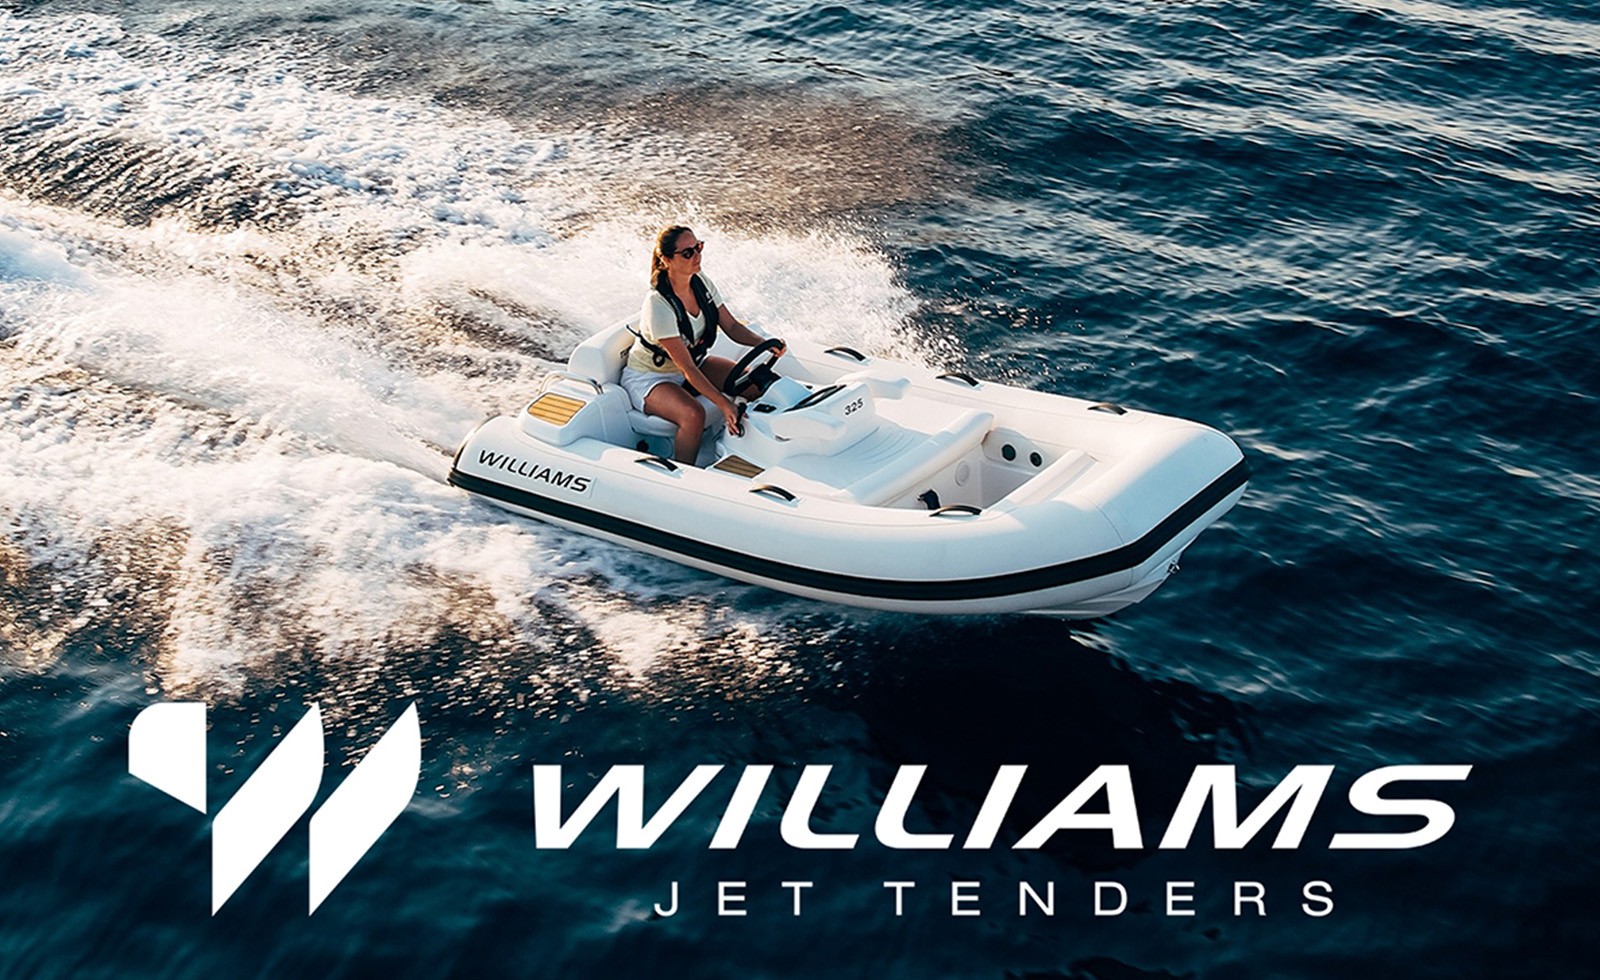 Williams Jet Tenders announces a new look inspired by component shapes from inside their factory.